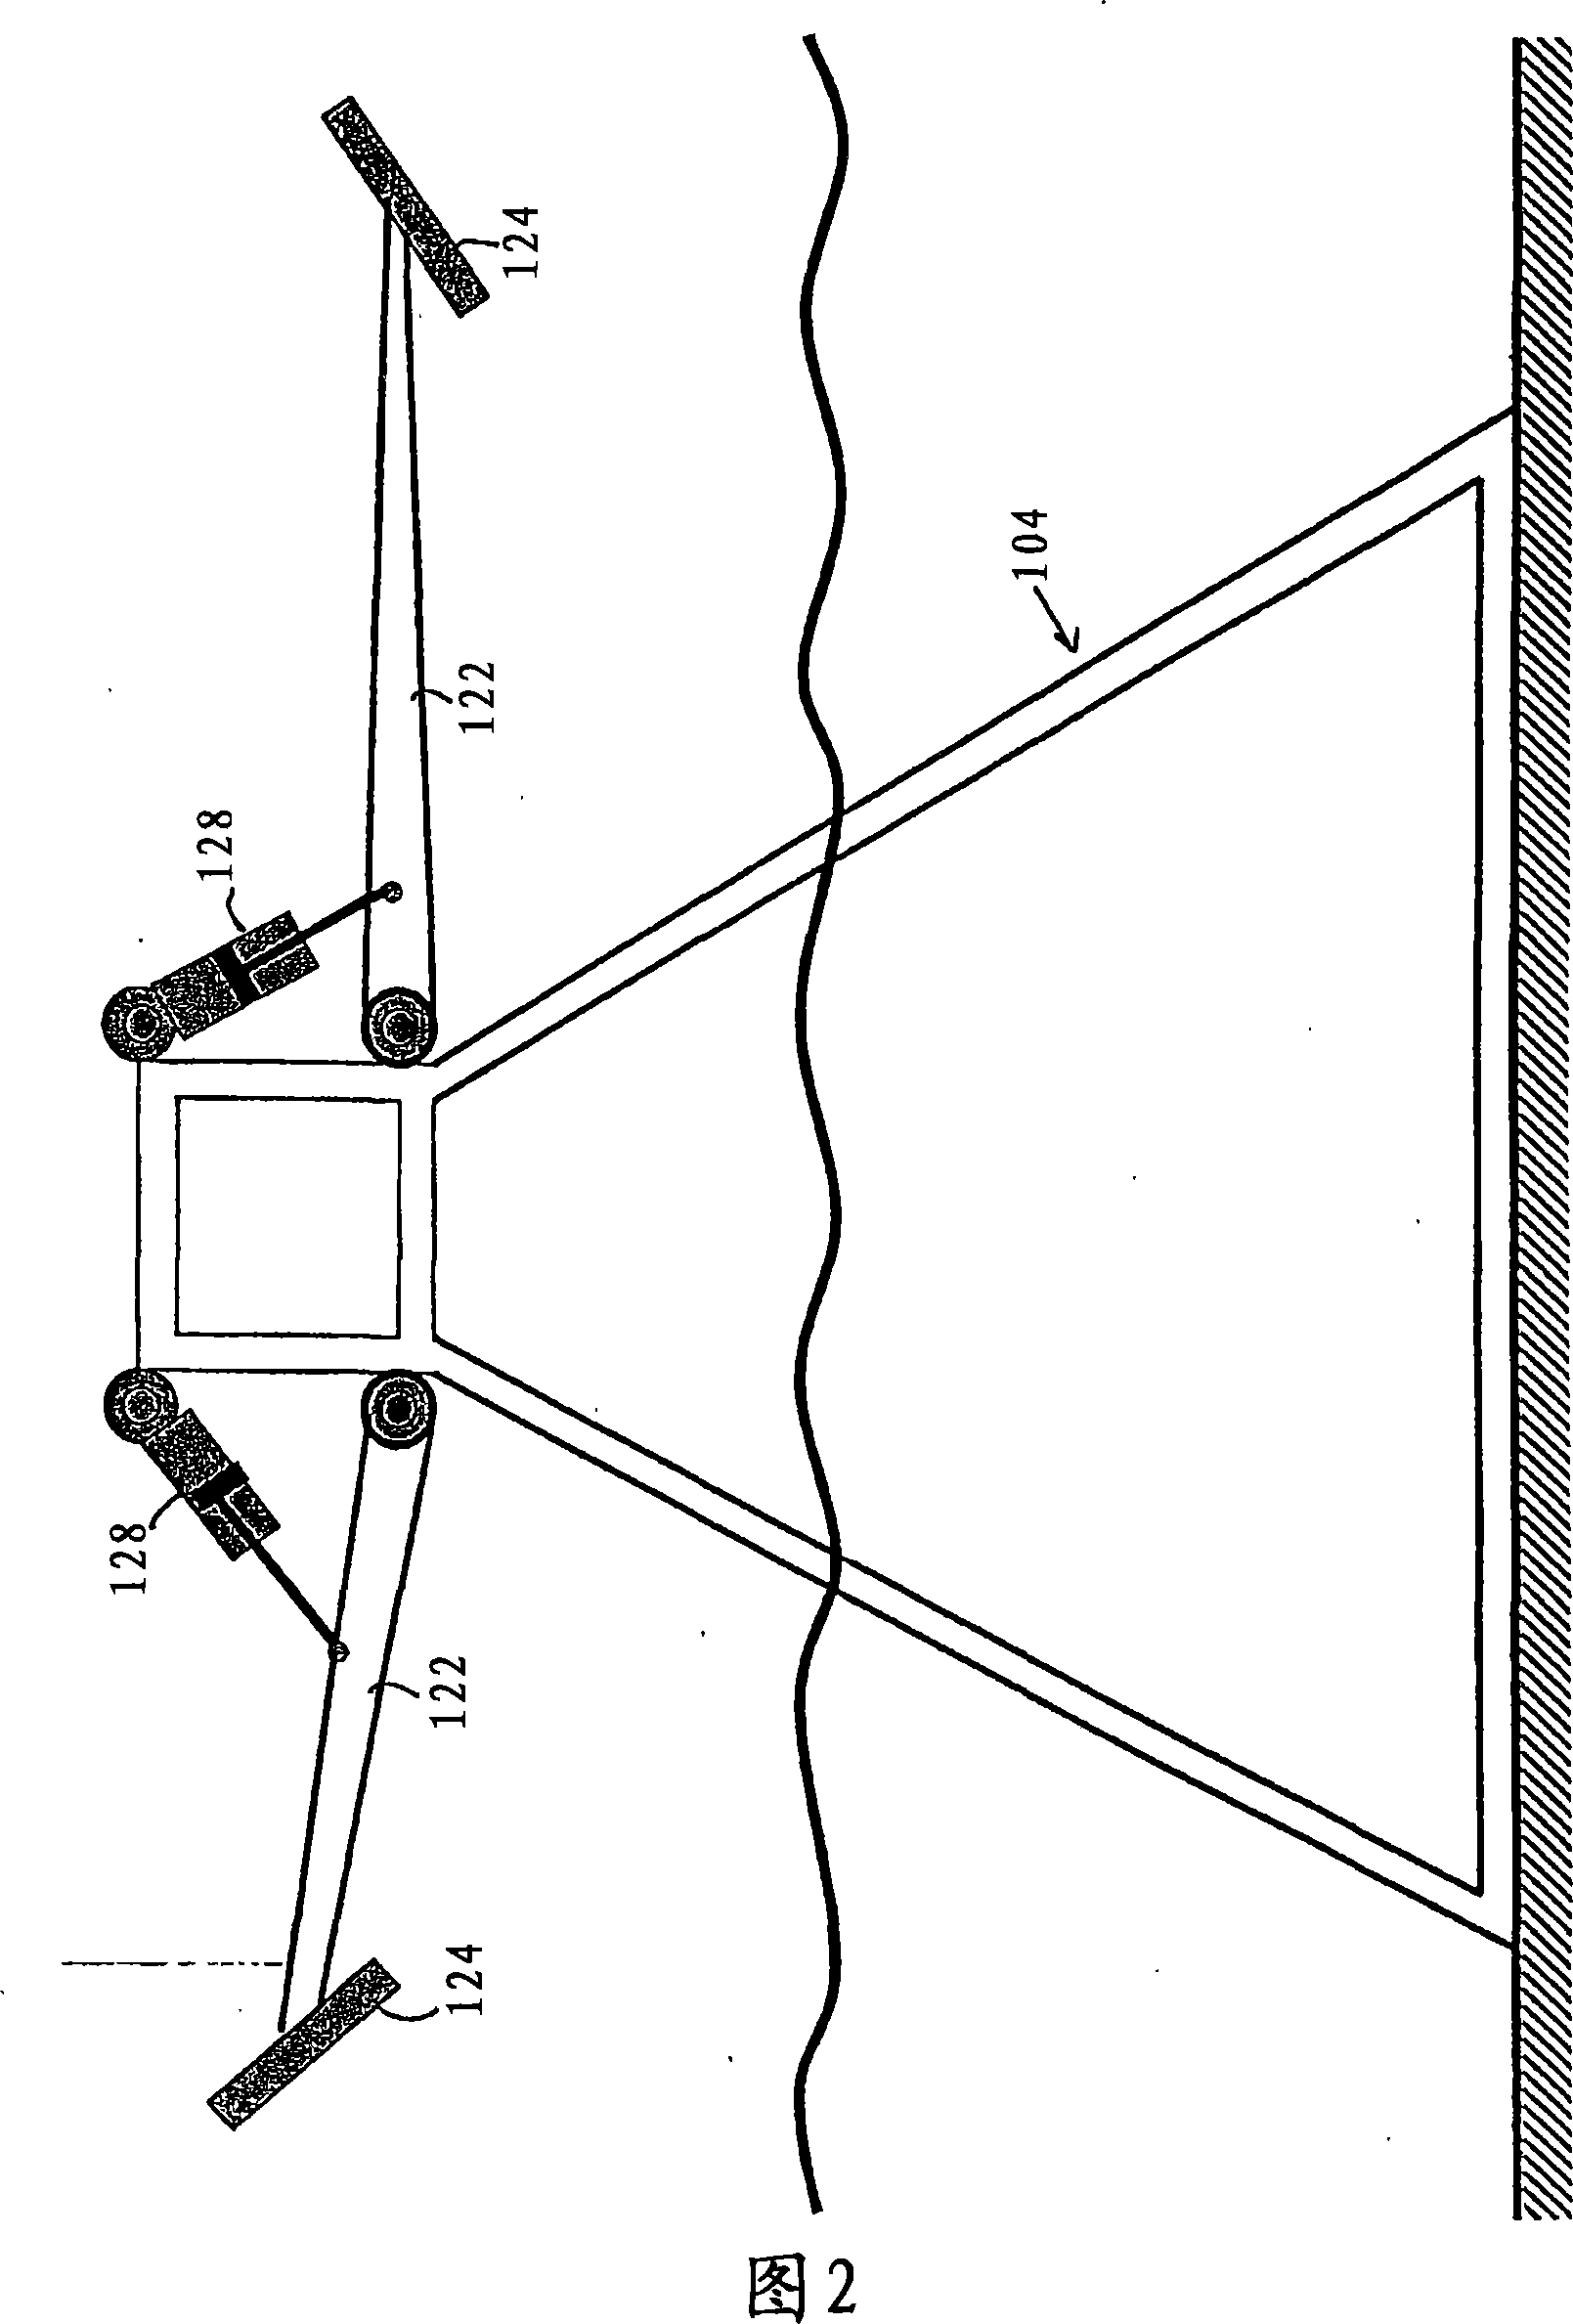 An installation comprising a wave power apparatus and a support structure therefor